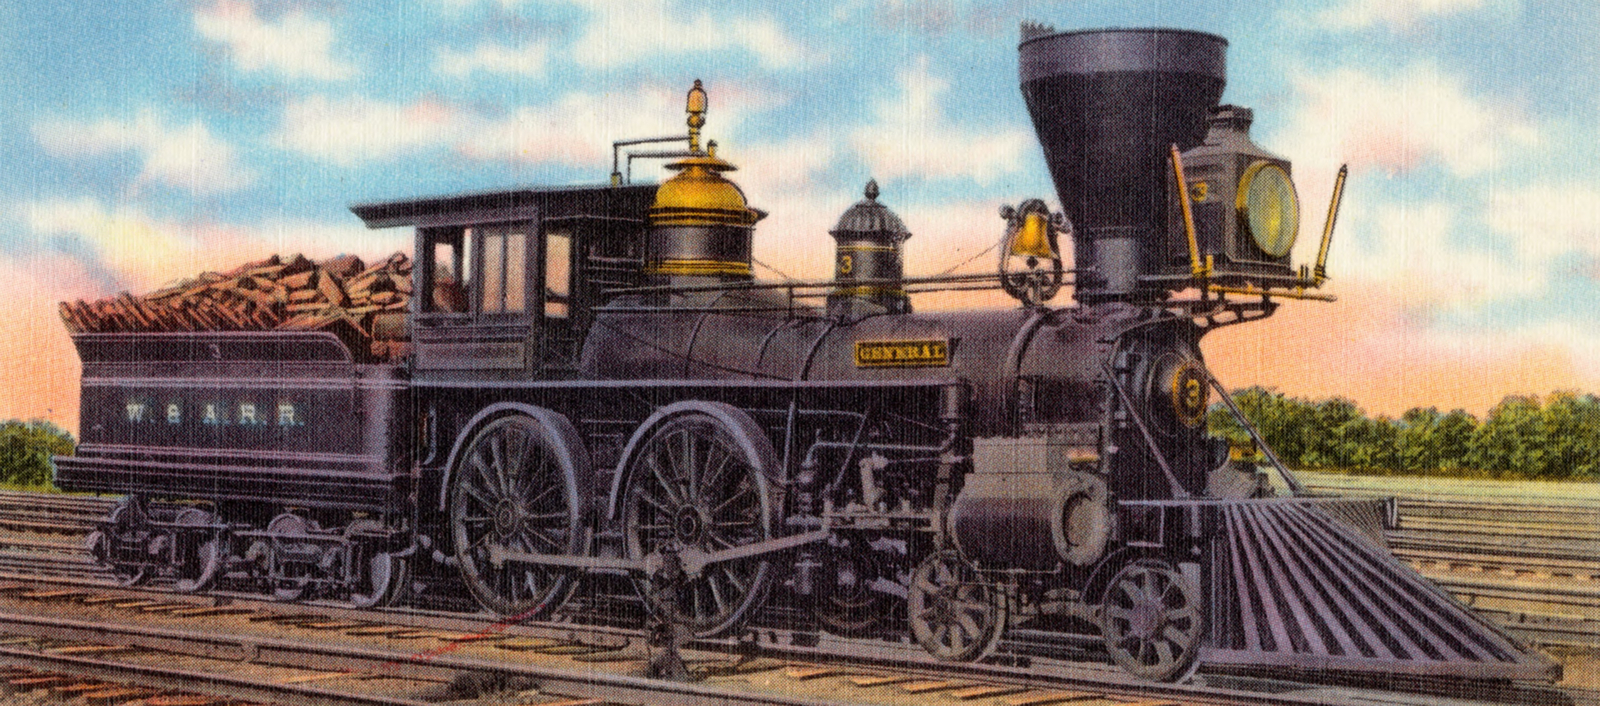 Depiction of the locomotive on a postcard